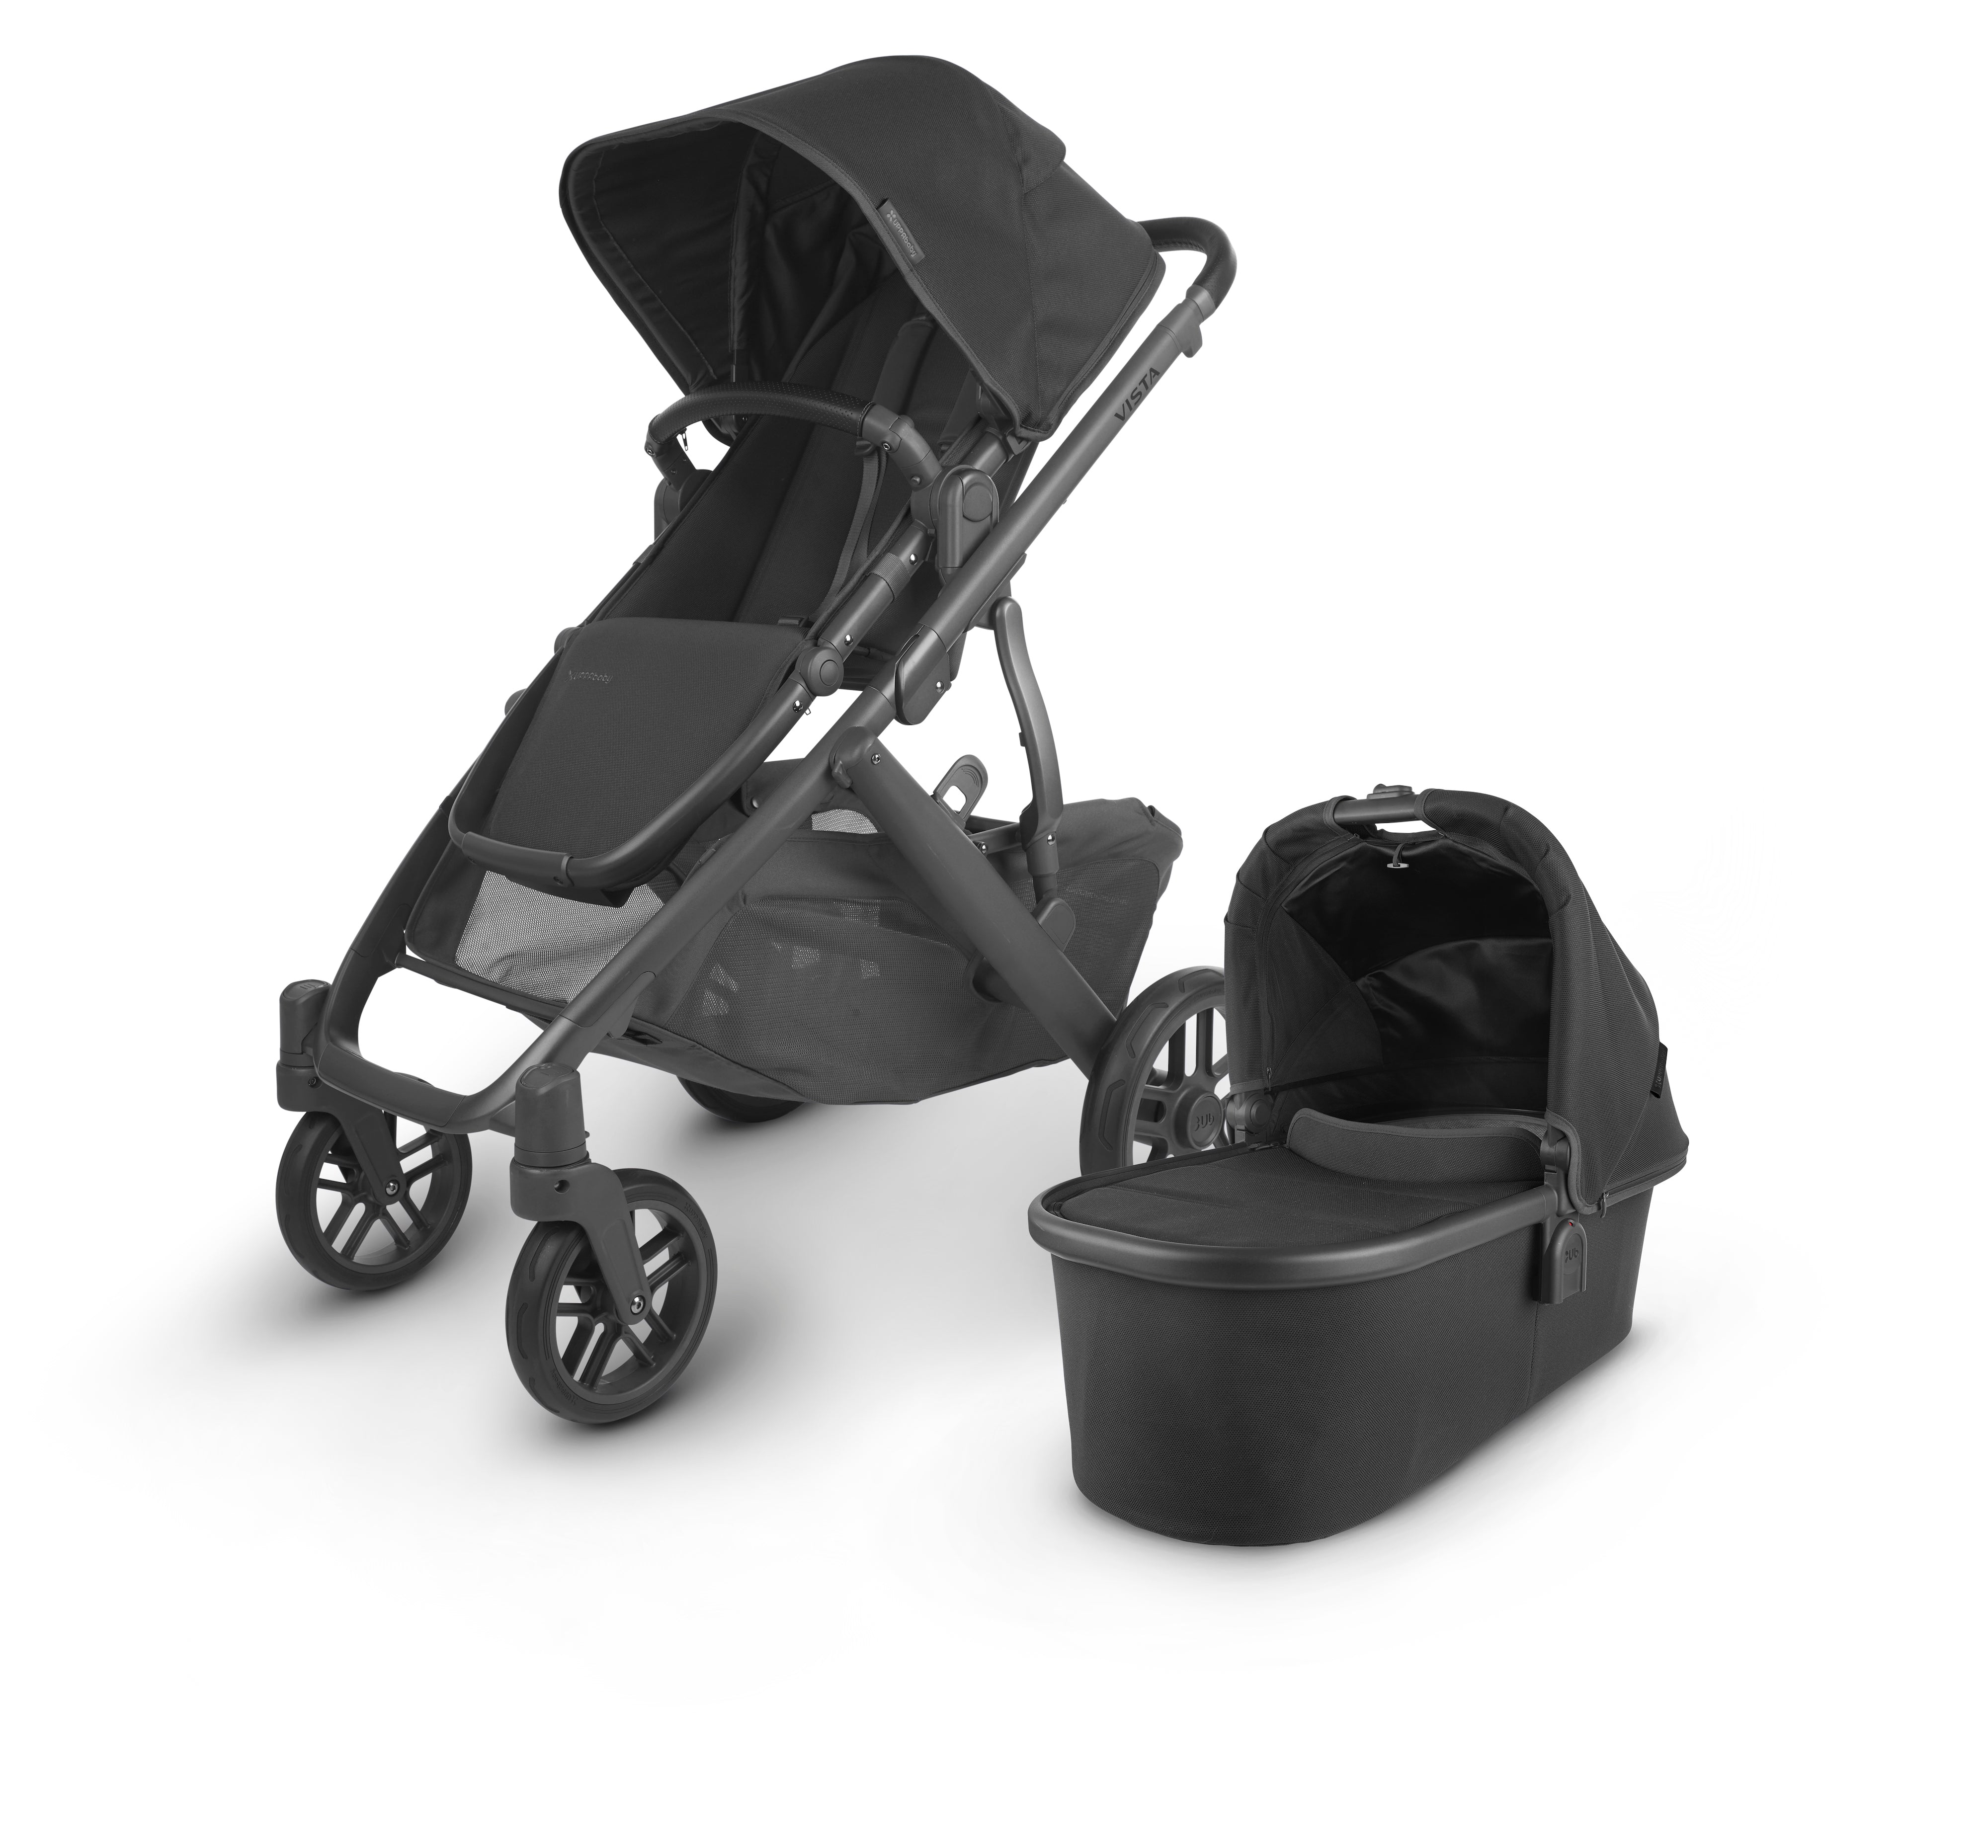 UPPAbaby